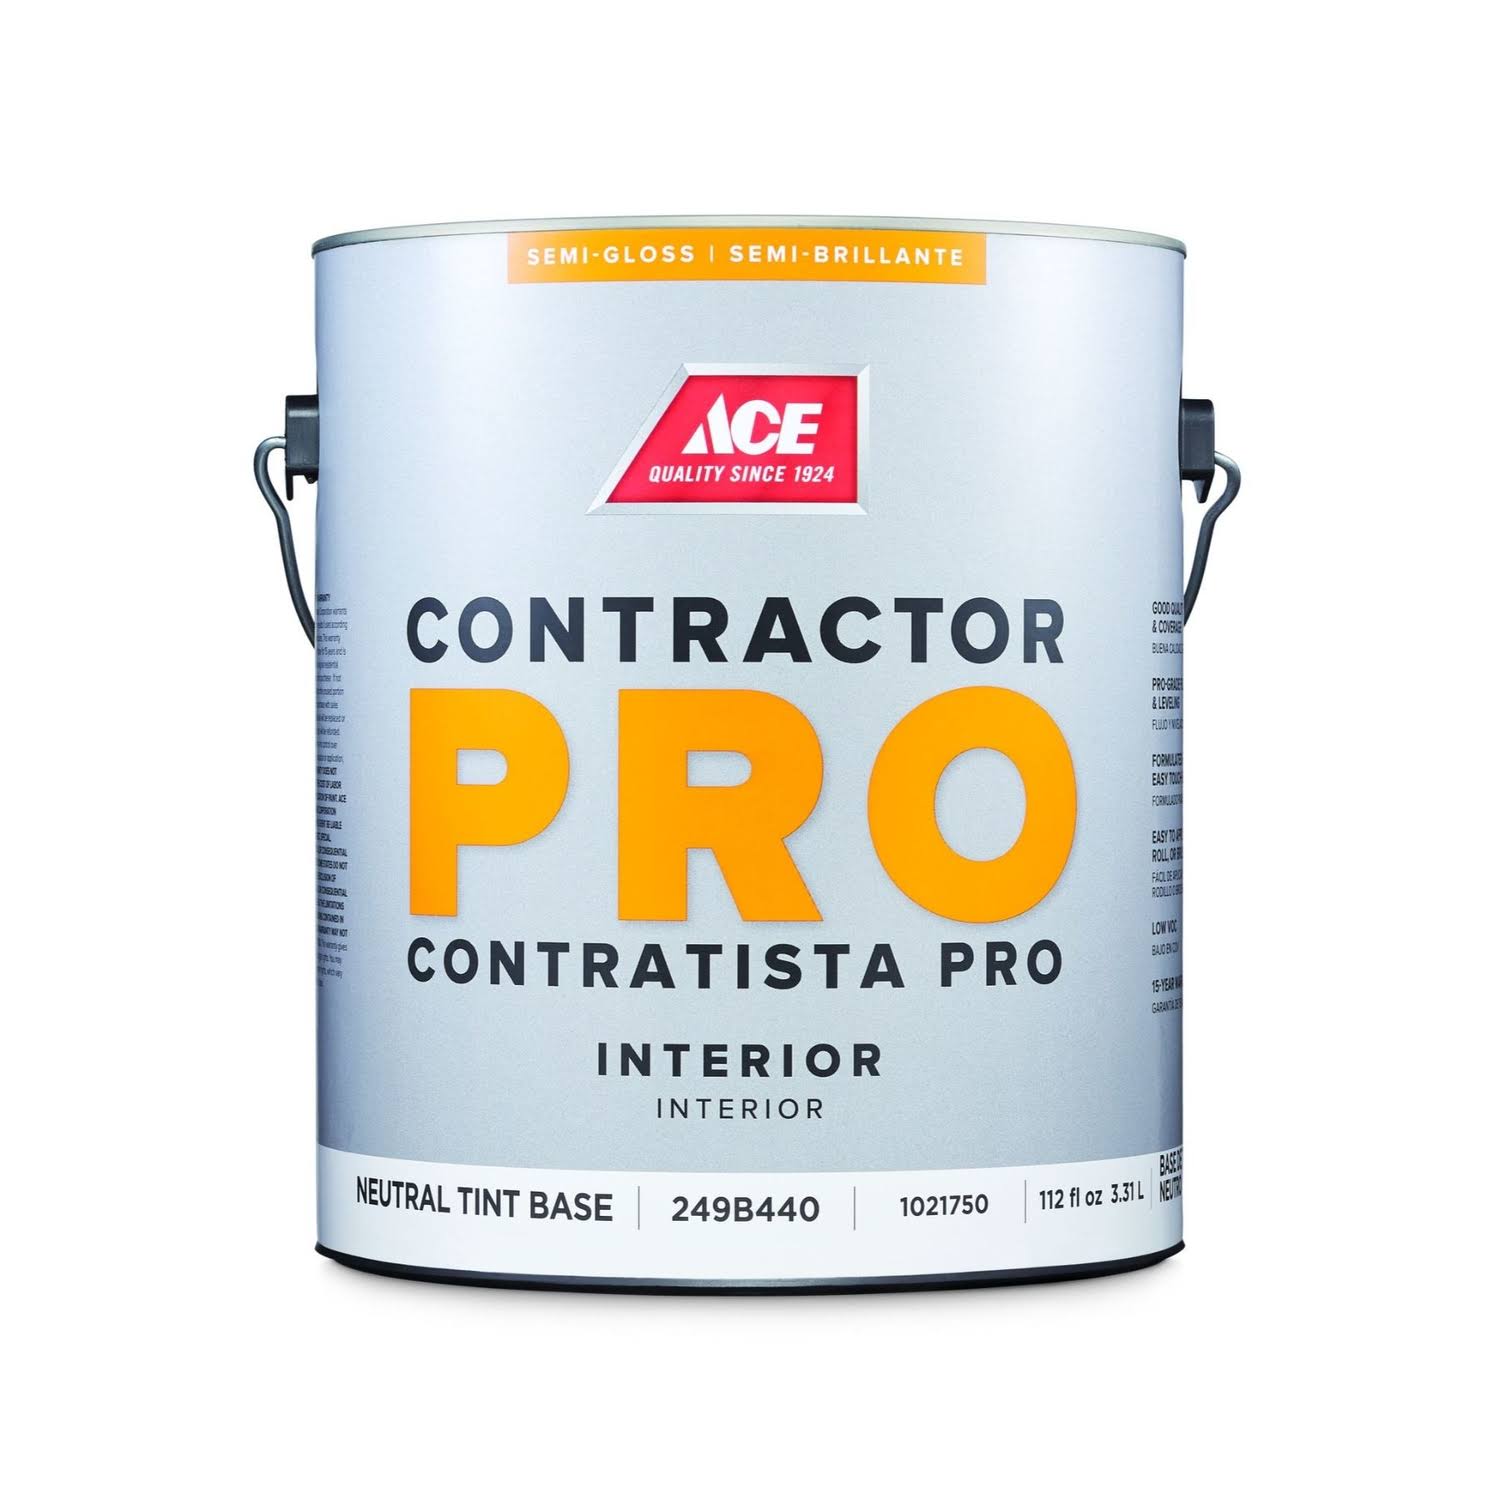 Ace Contractor Pro Semi-Gloss Tint Base Neutral Base Latex Paint Indoor 1 gal.